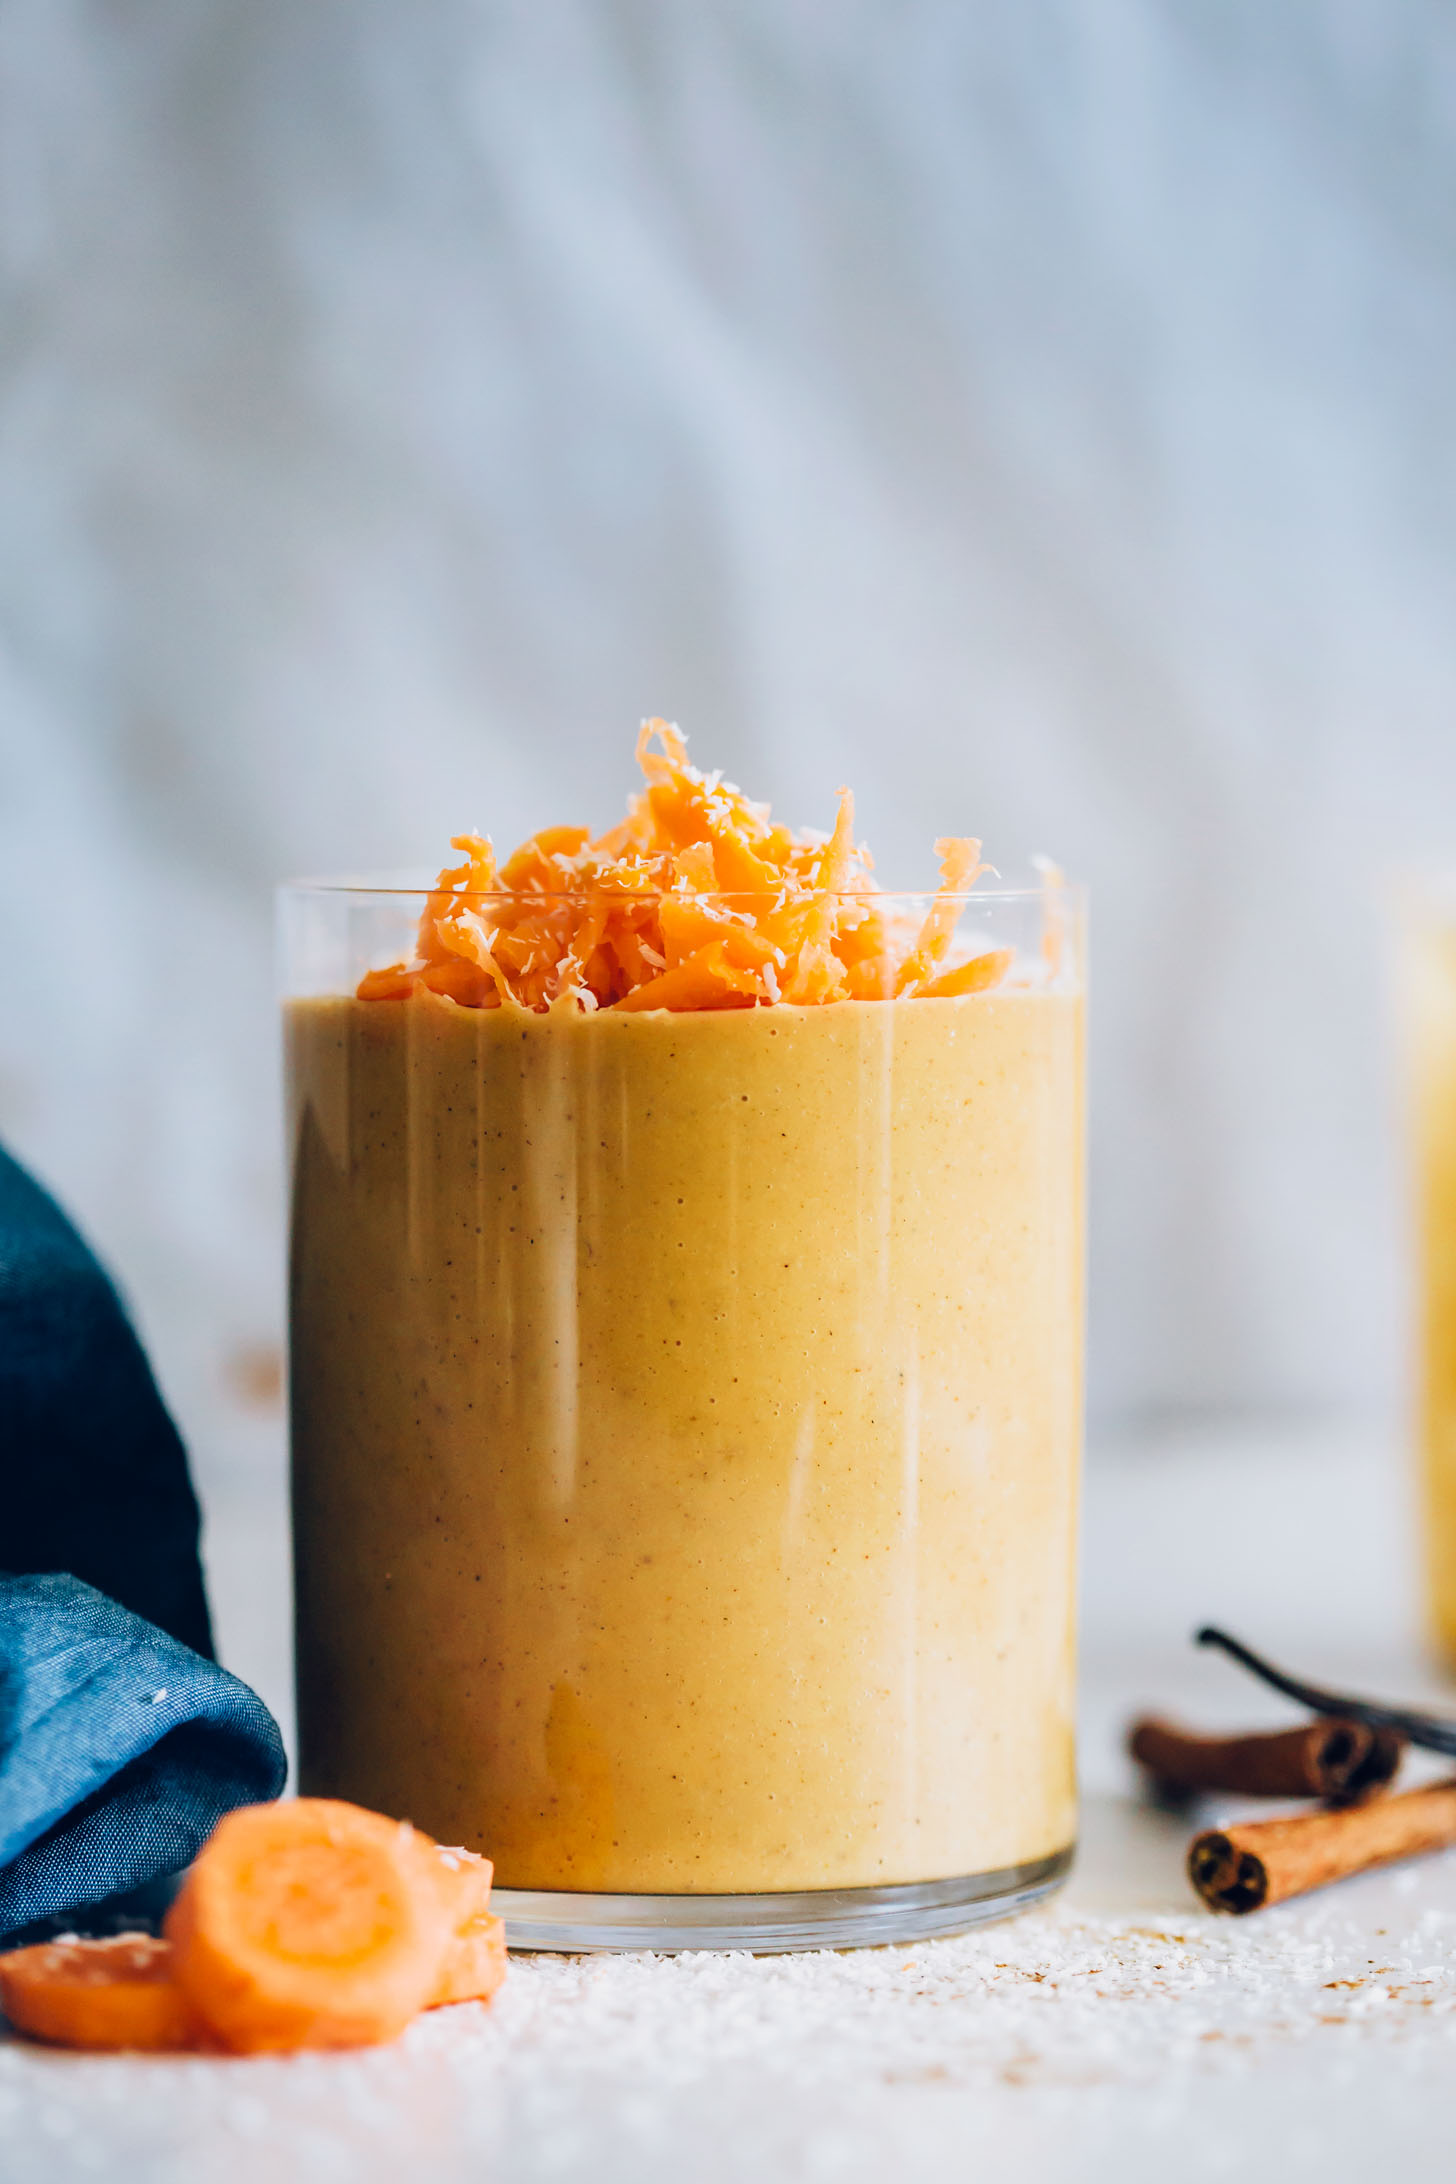 Glass of our Creamy Carrot Cake Smoothie topped with shredded carrot and coconut